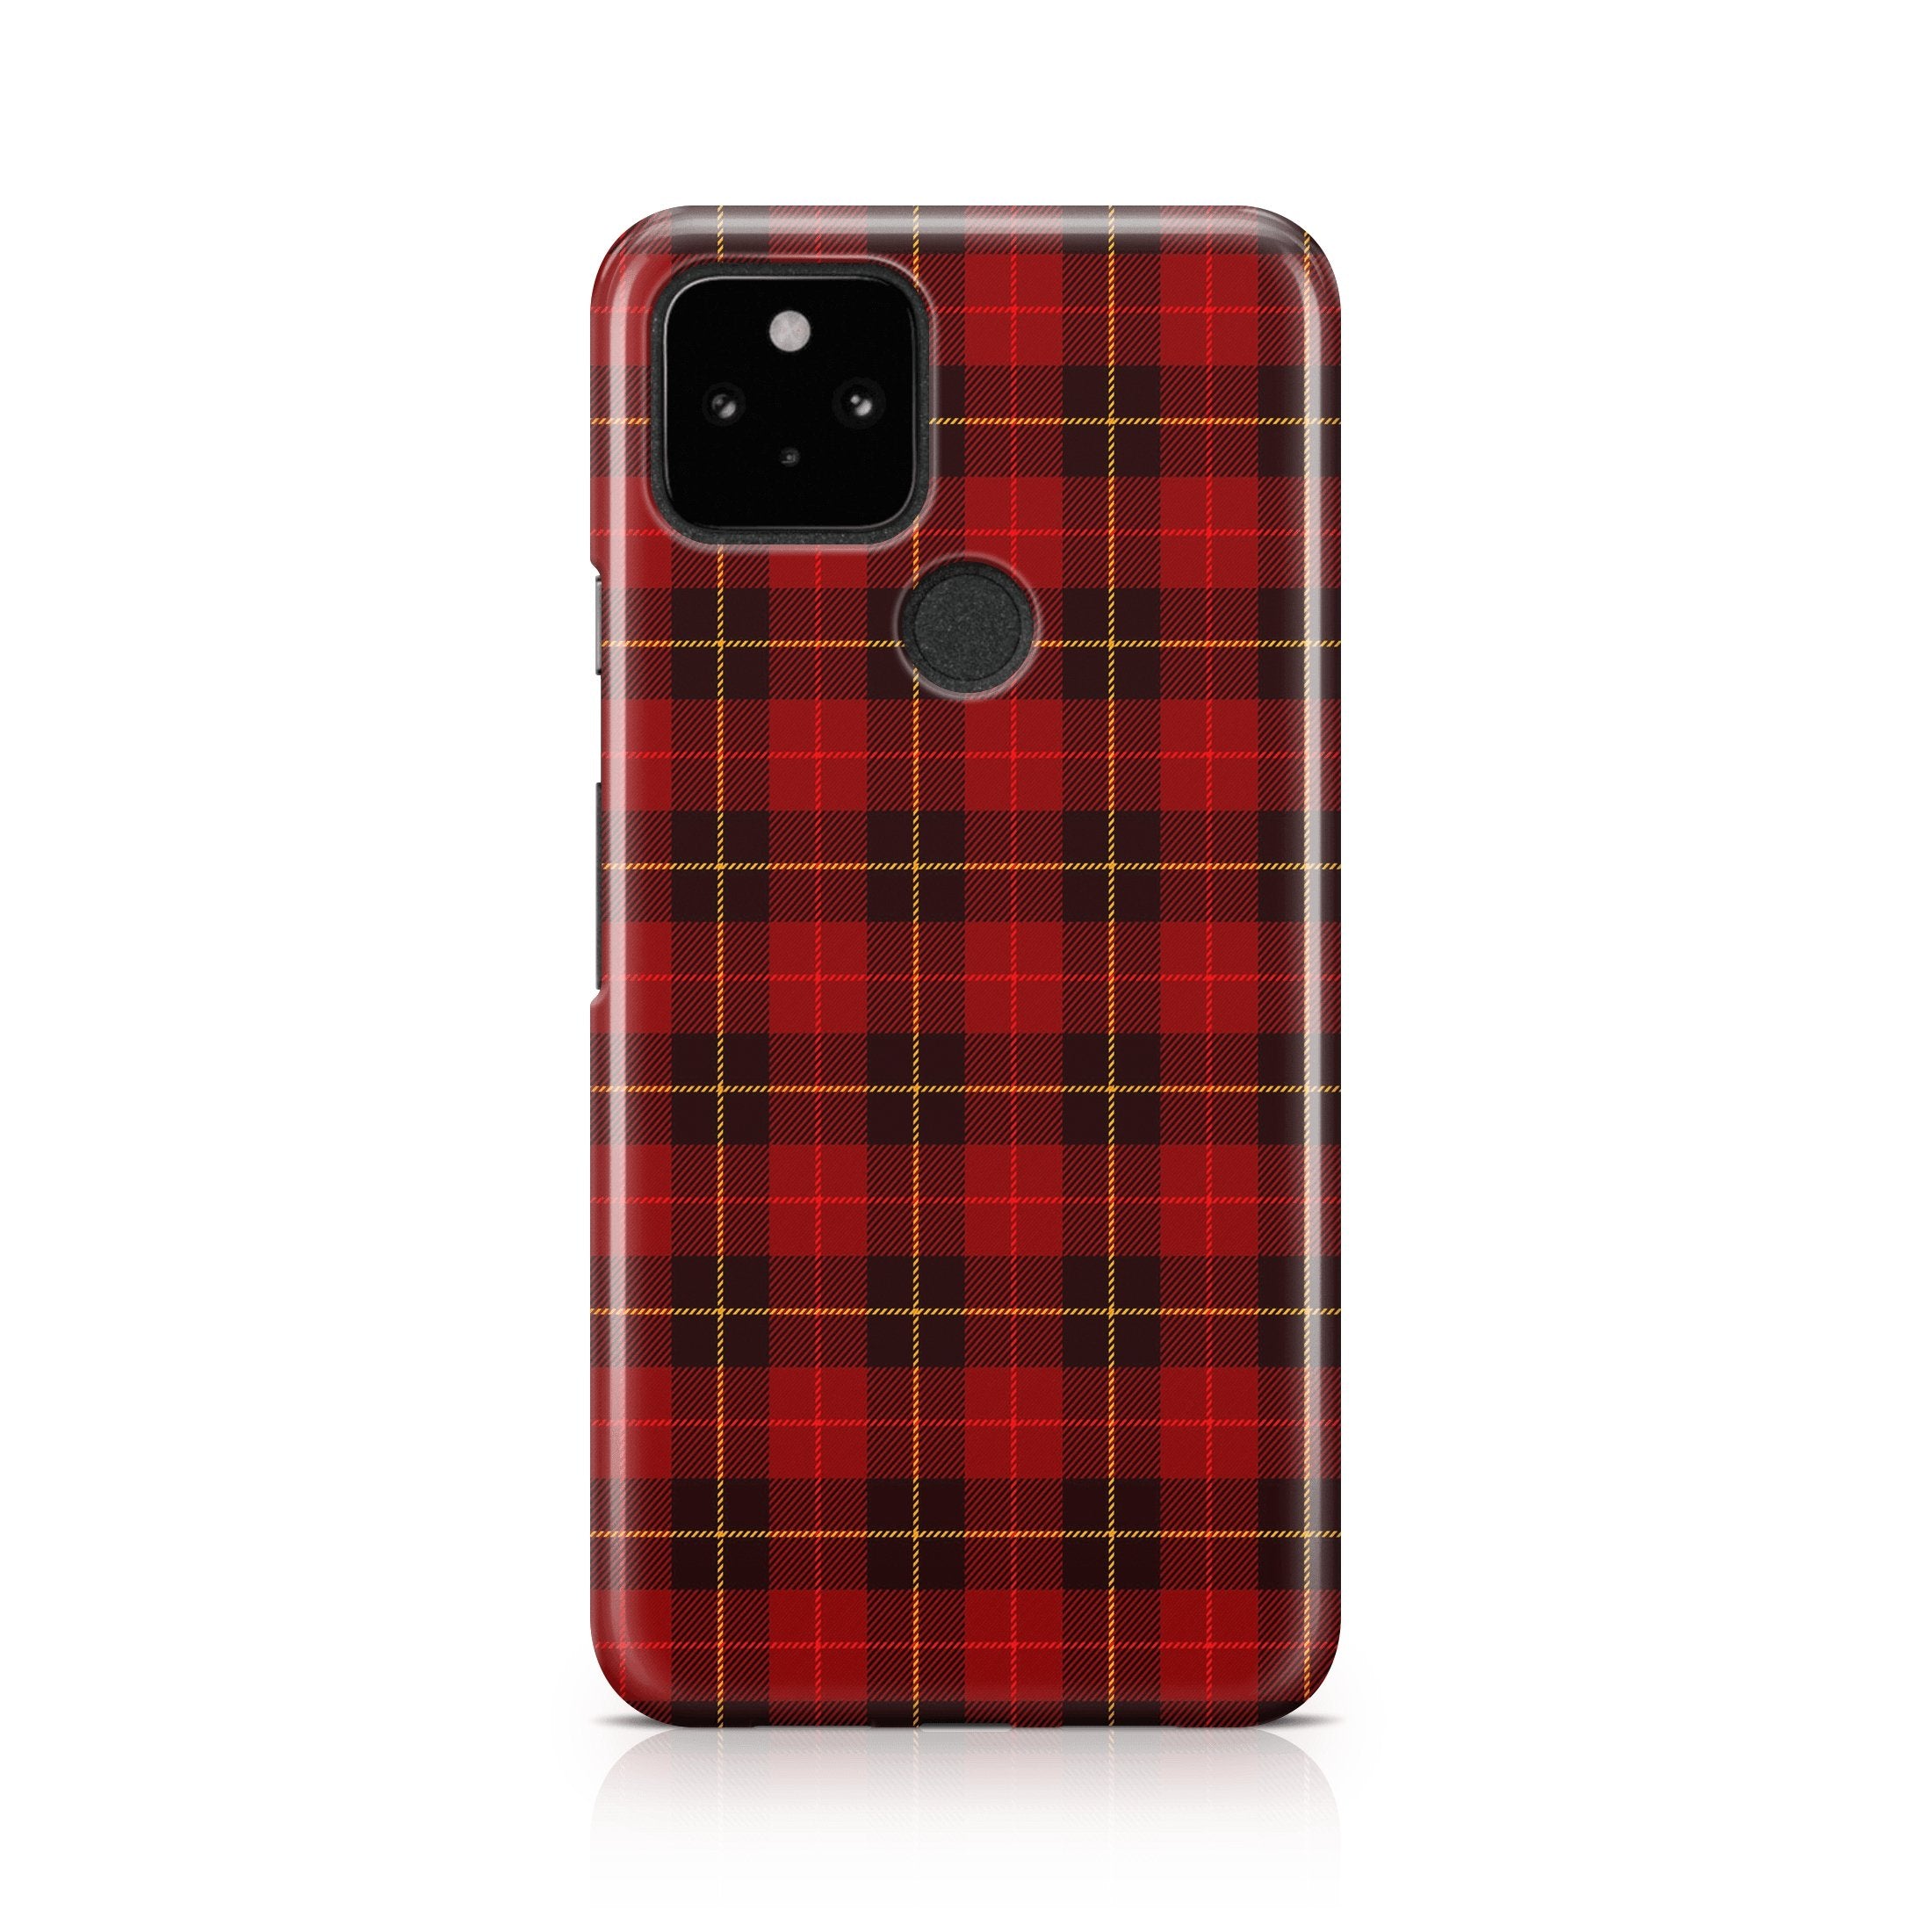 Red Plaid Tartan - Google phone case designs by CaseSwagger